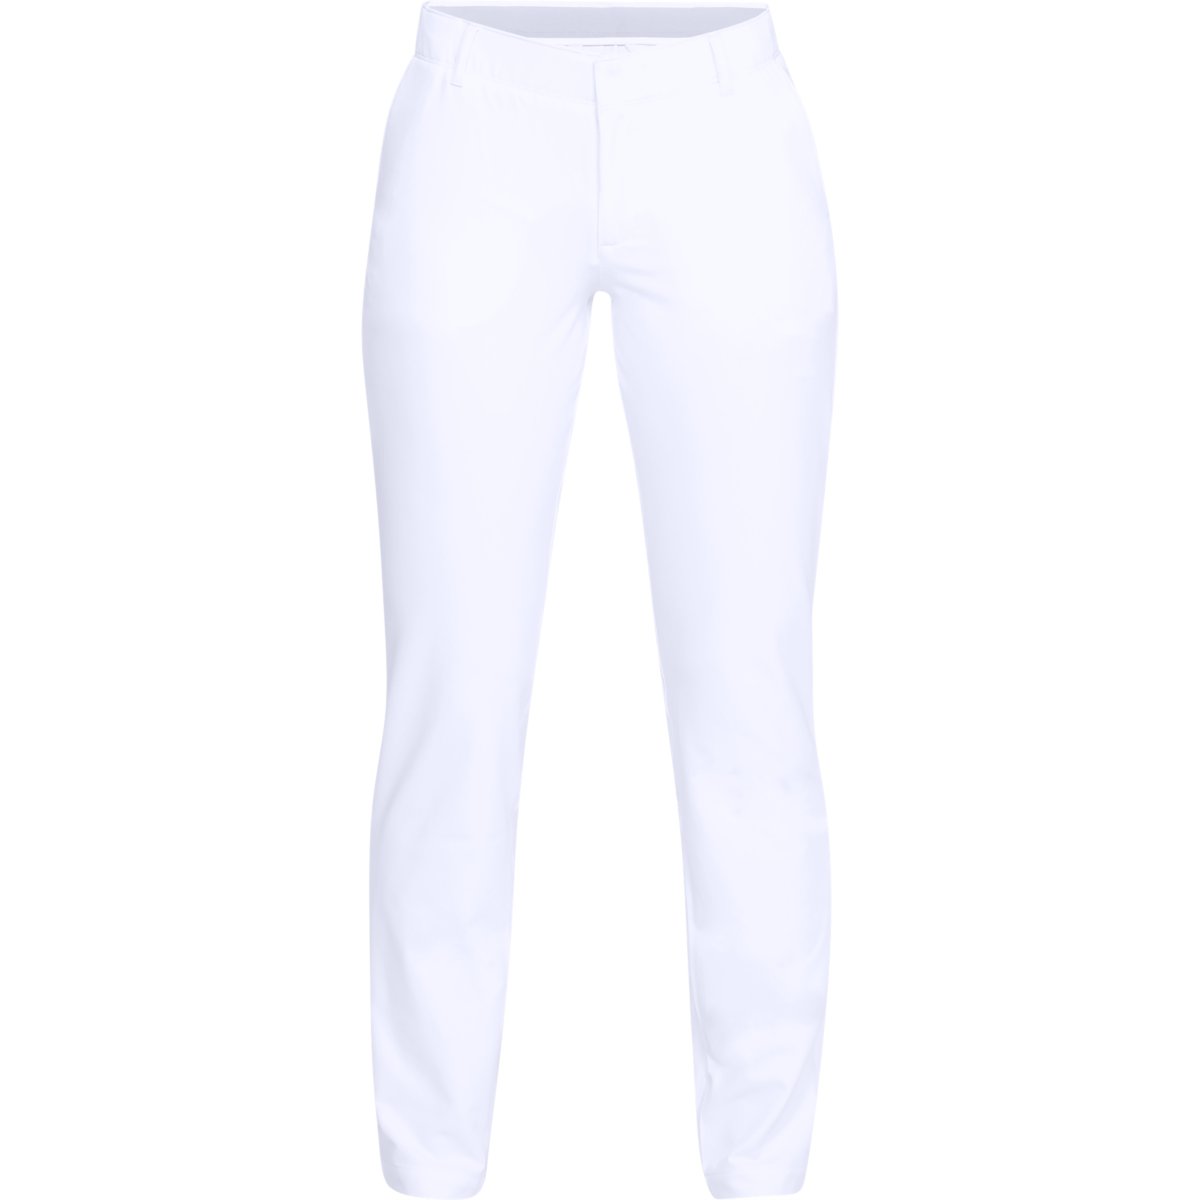 Under Armour Links Pant White – 4